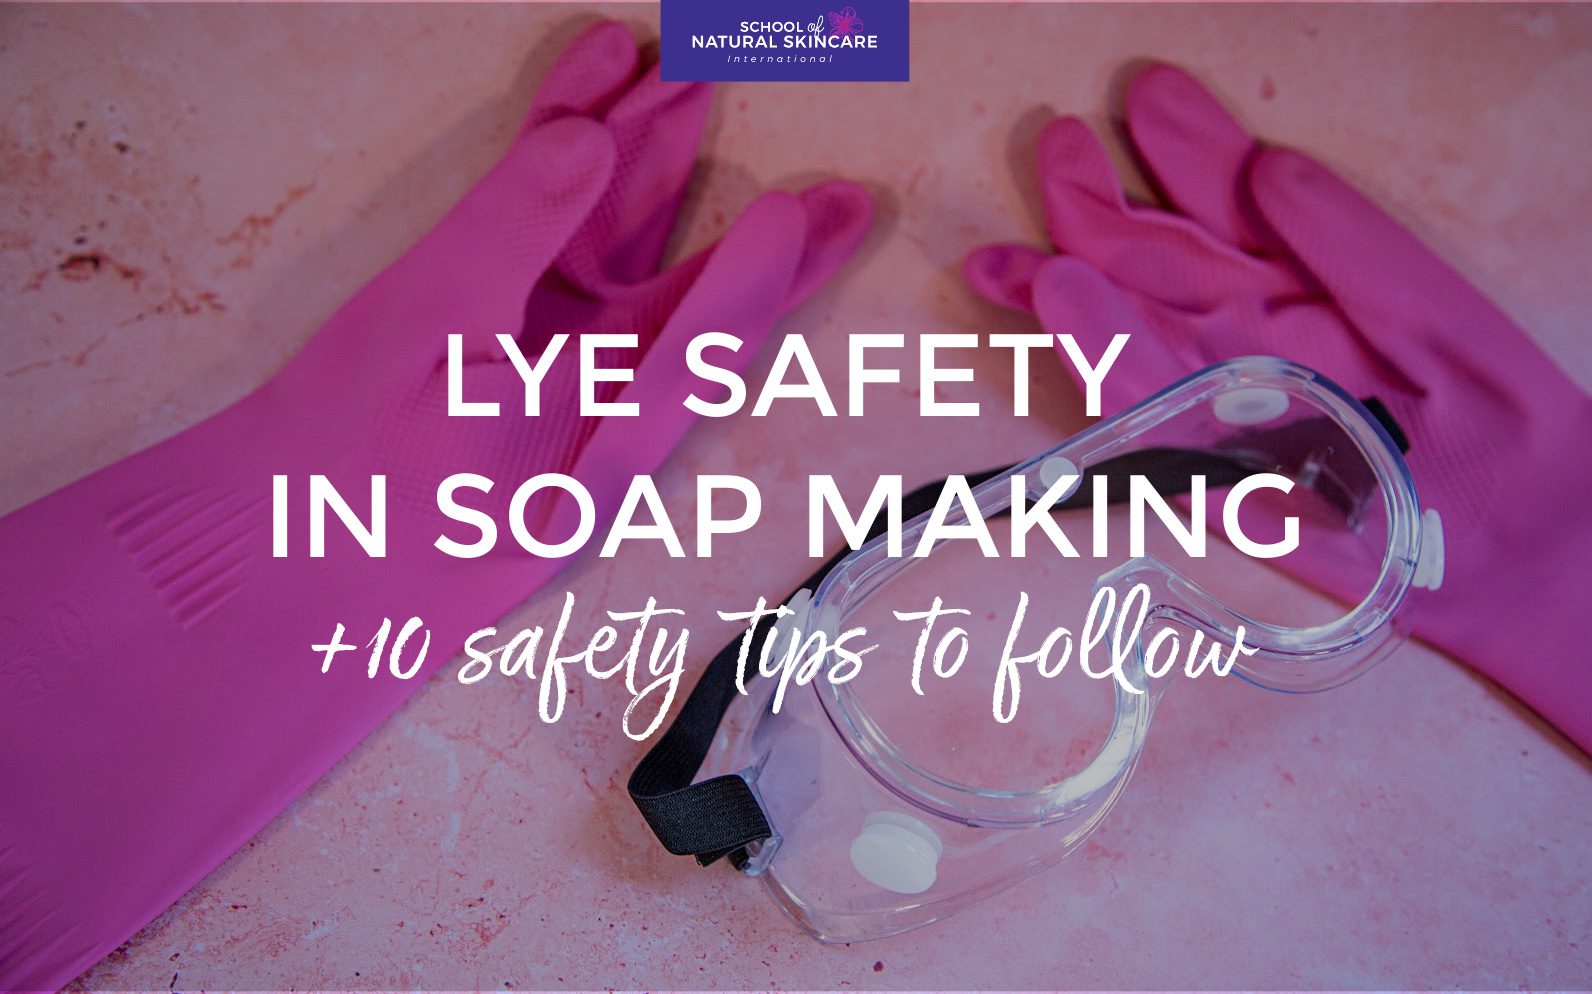 Lye Safety in Soap Making + 10 Safety Tips to Follow - School of Natural  Skincare